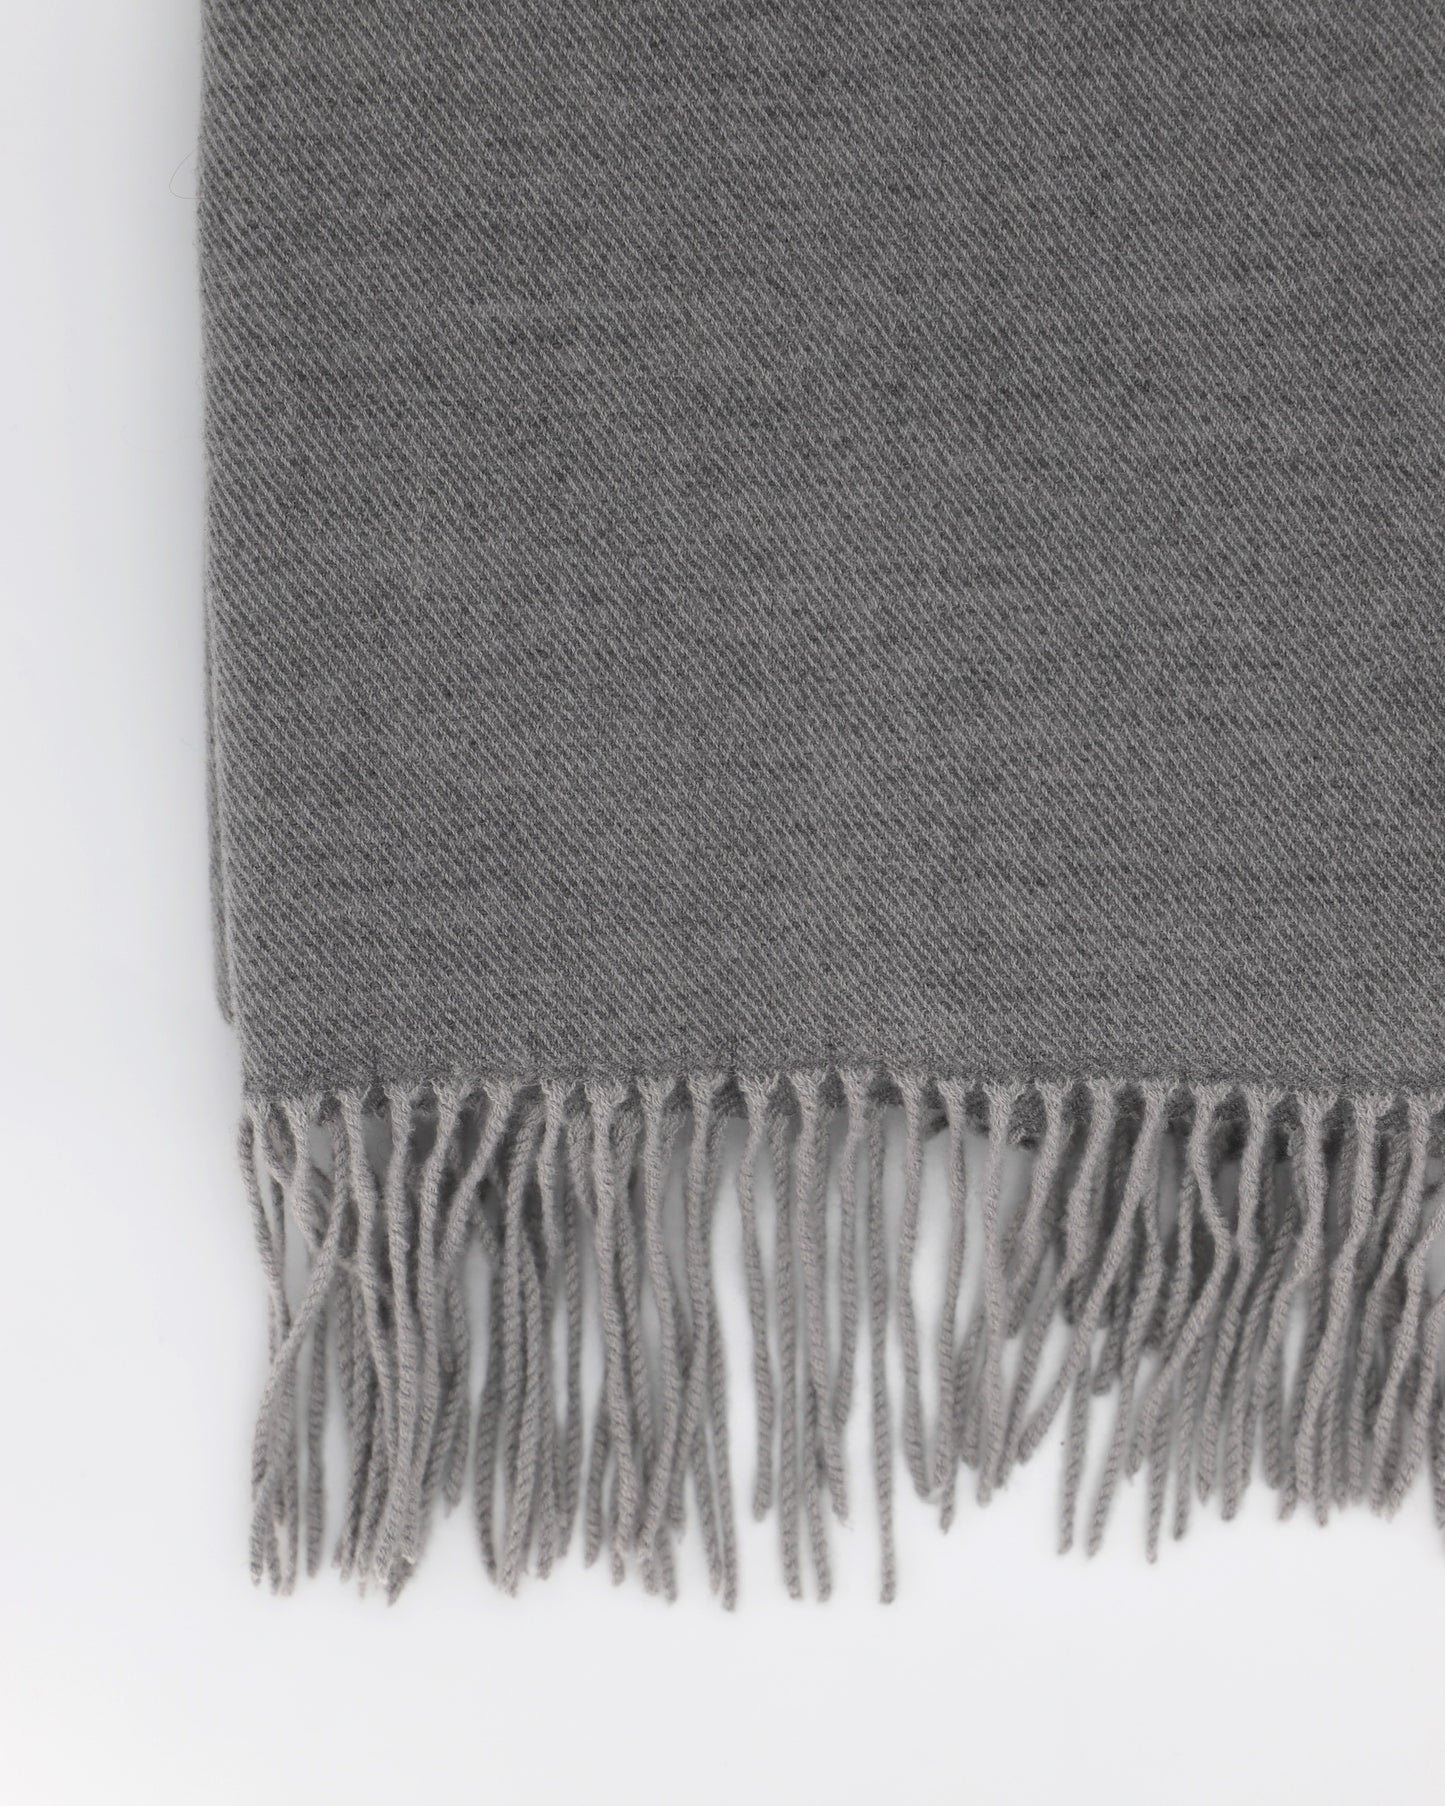 Soft Cashmere and Visoce Scarf  - Light Gray - Scarf Designers